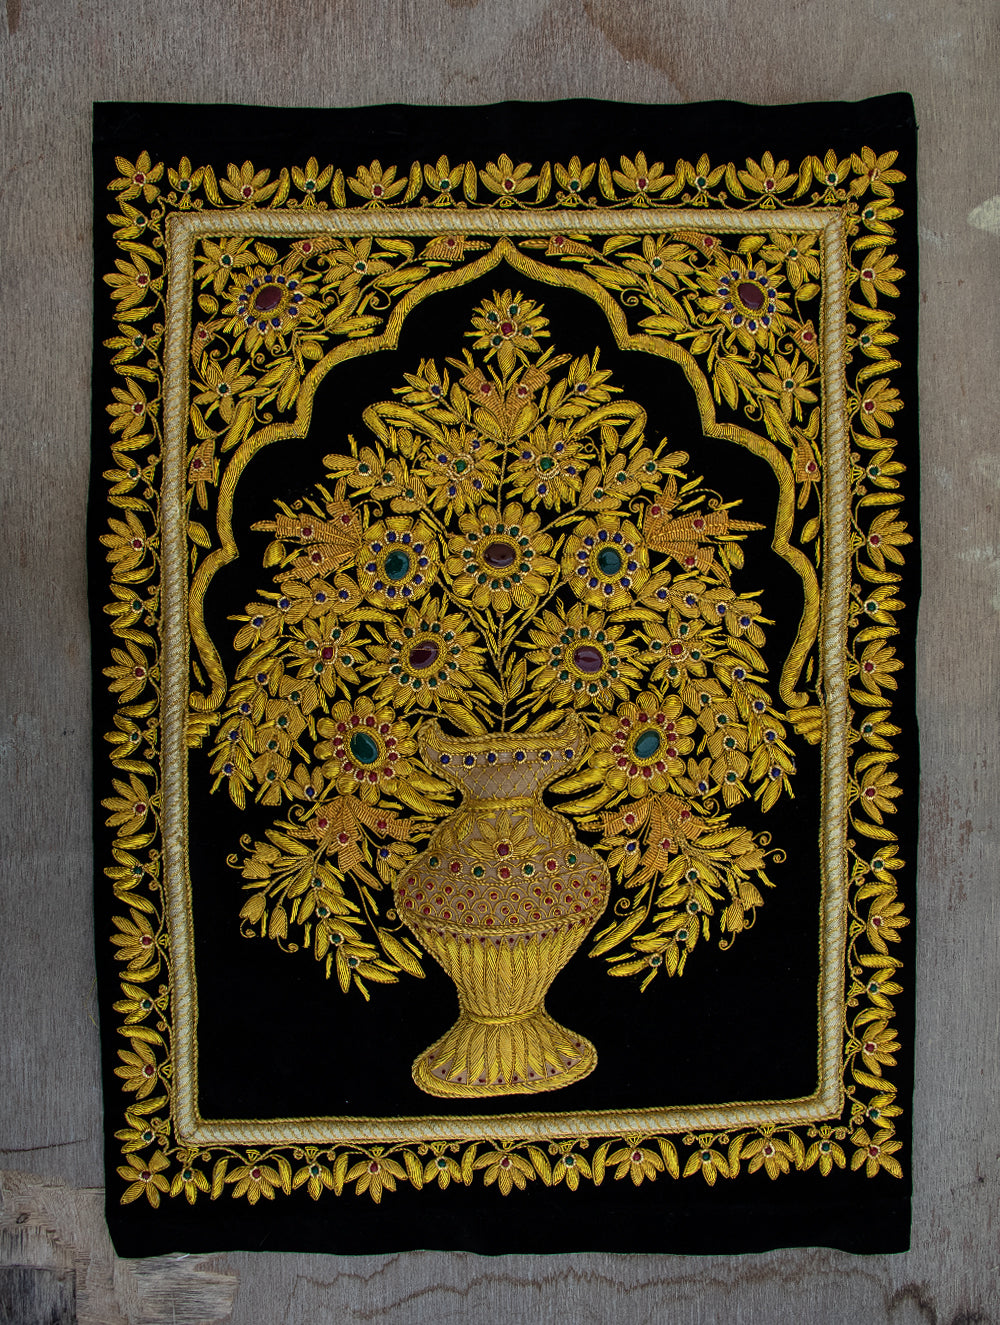 Load image into Gallery viewer, Zardozi Resham Embroidered Wall Hanging - The India Craft House 